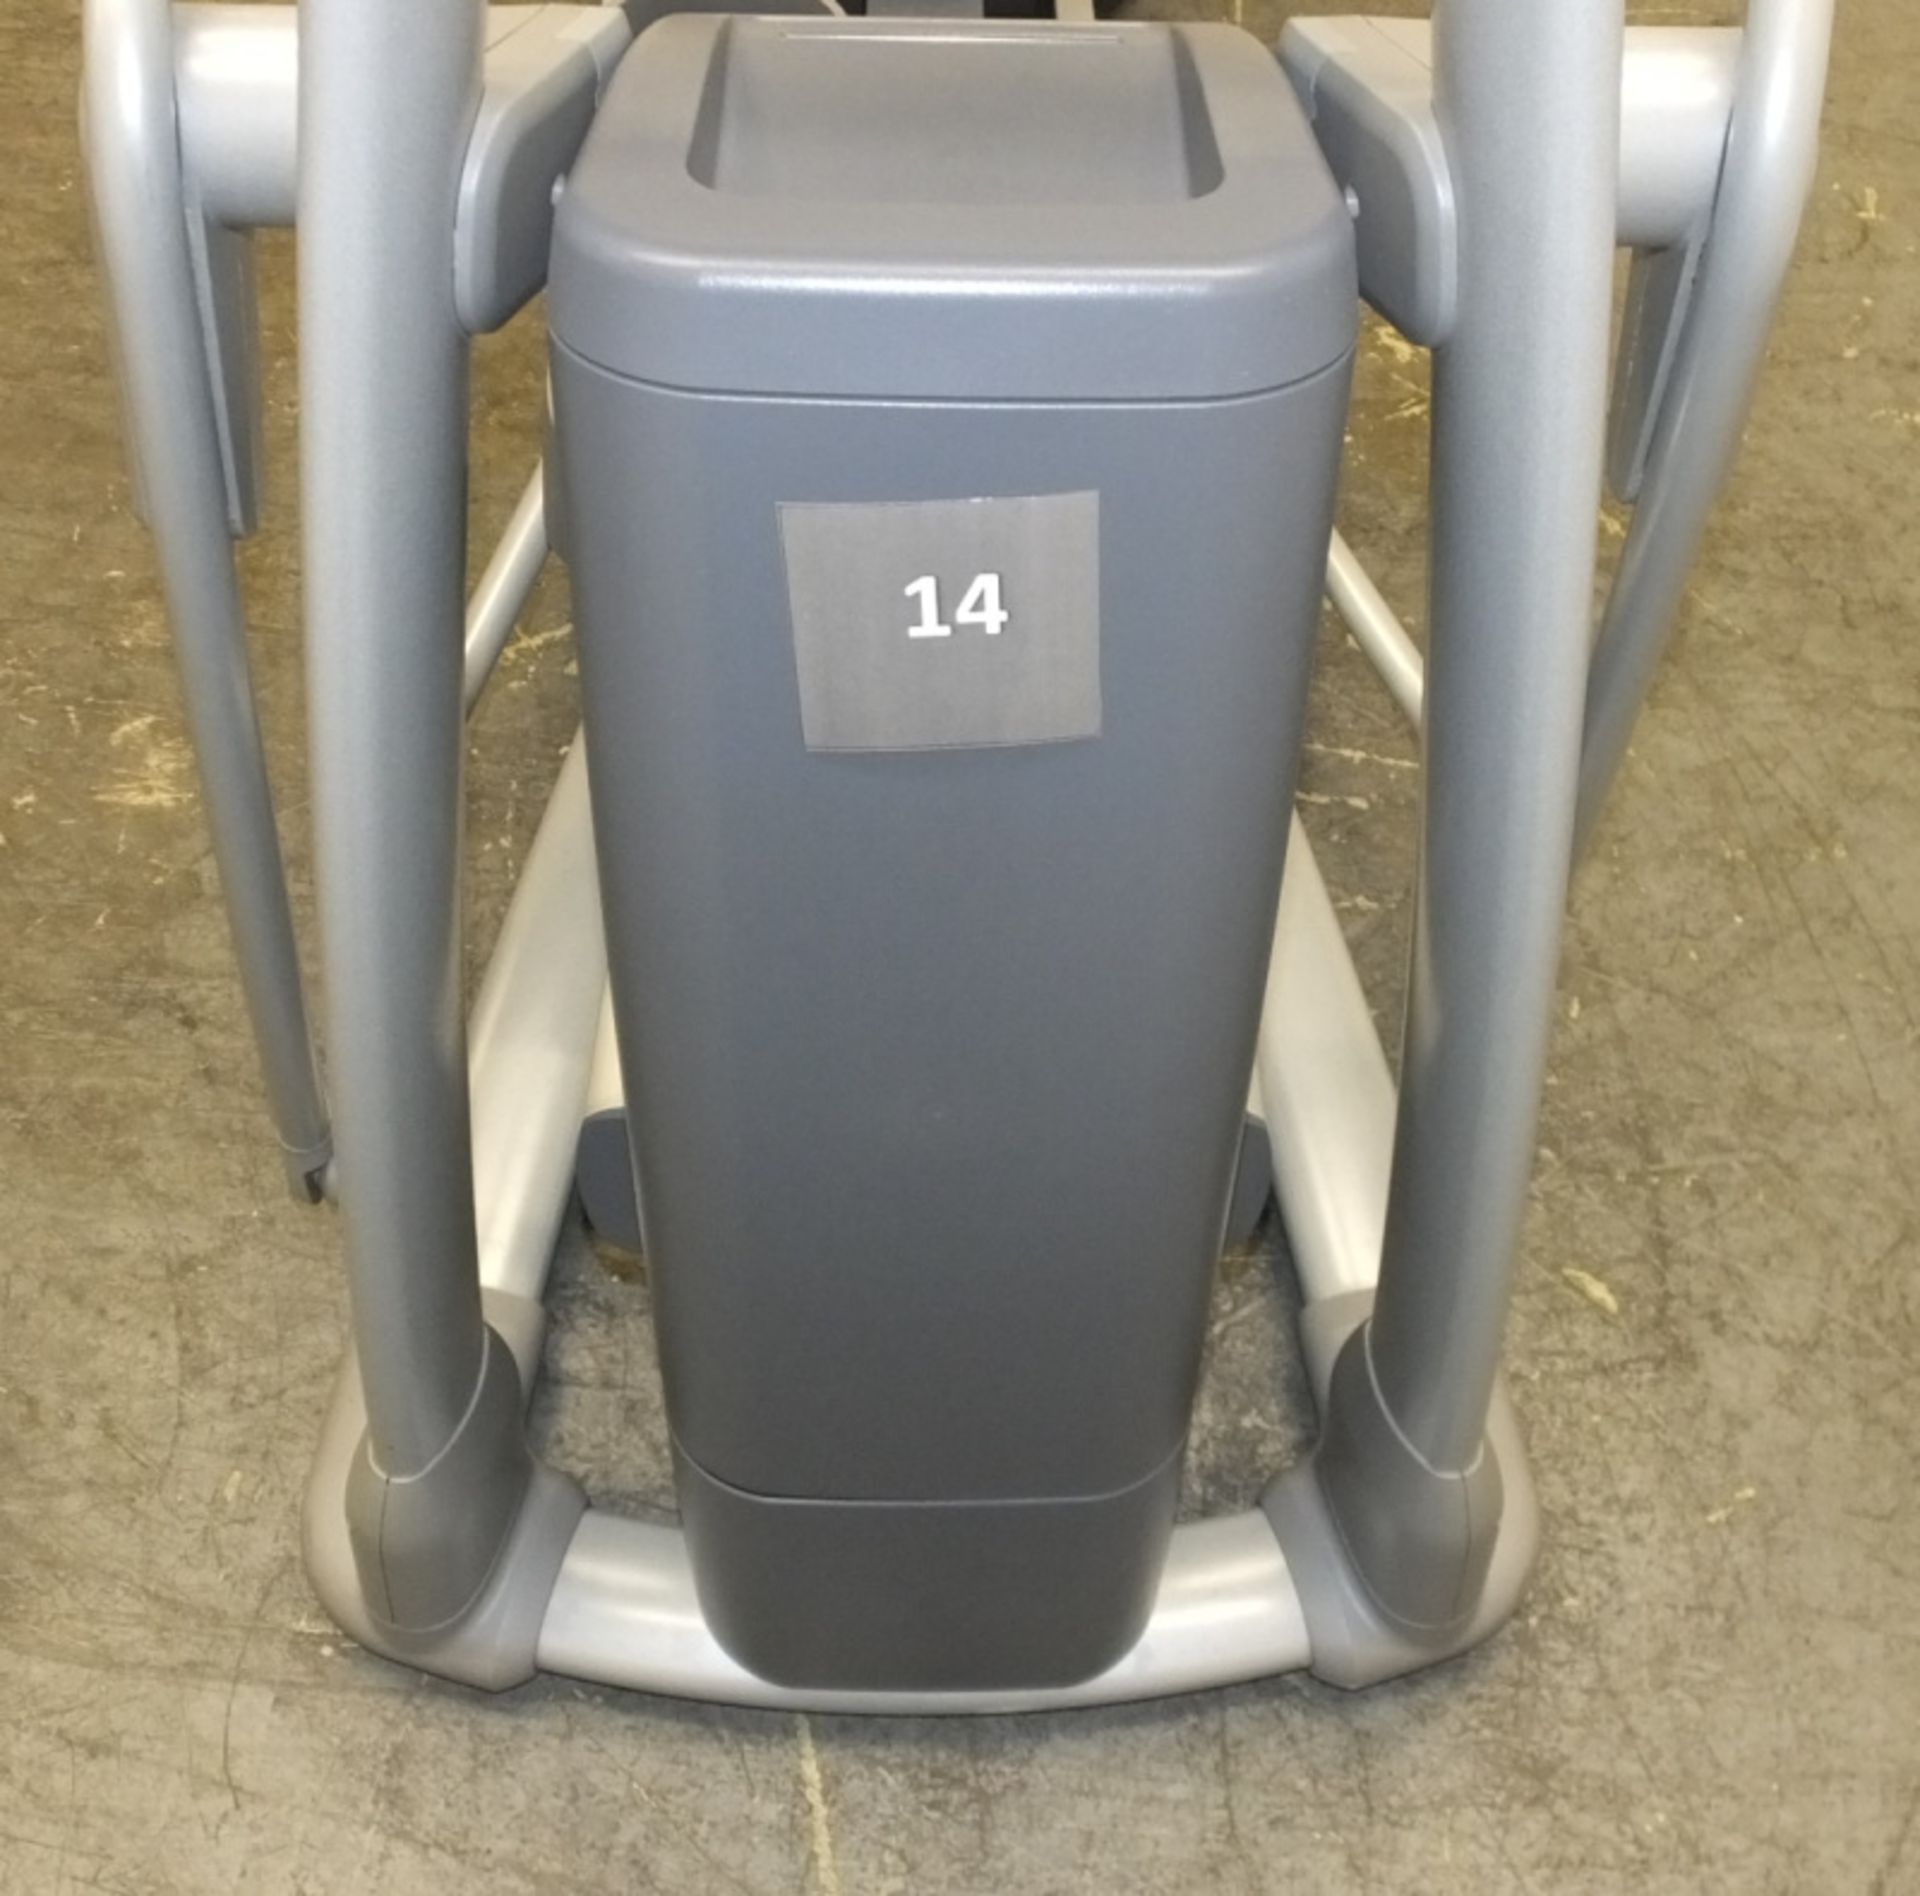 Precor EFX 576i Elliptical Cross Trainer - Please see pictures for condition - Image 8 of 13